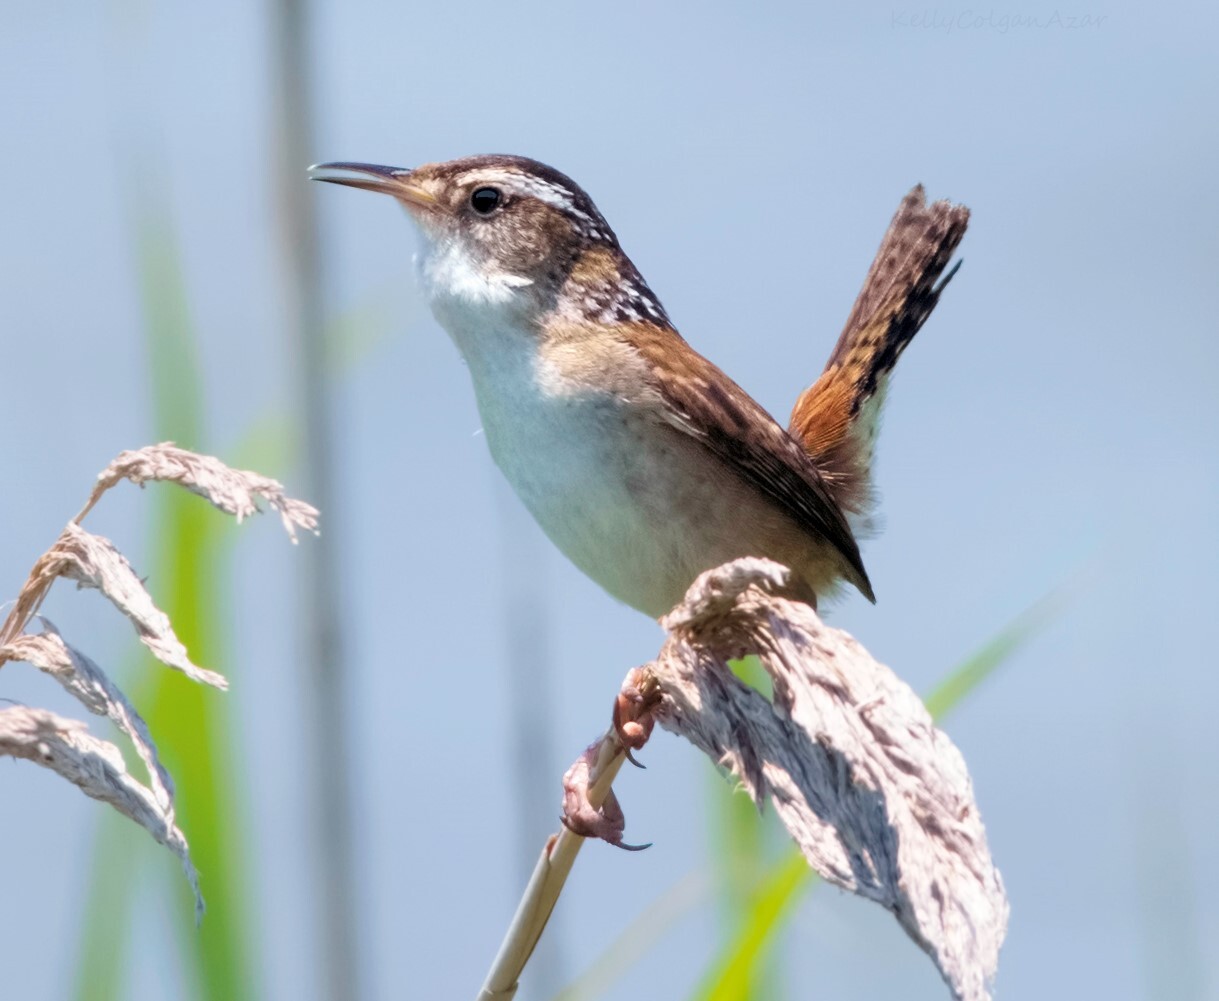 The hard-to-spot Marsh Wren breeds in Idlewild Park. <a href="https://www.flickr.com/photos/puttefin/9076255630/" target="_blank">Photo</a>: Kelly Colgan Azar/<a href="https://creativecommons.org/licenses/by-nd/2.0/" target="_blank">CC BY-ND 2.0</a>